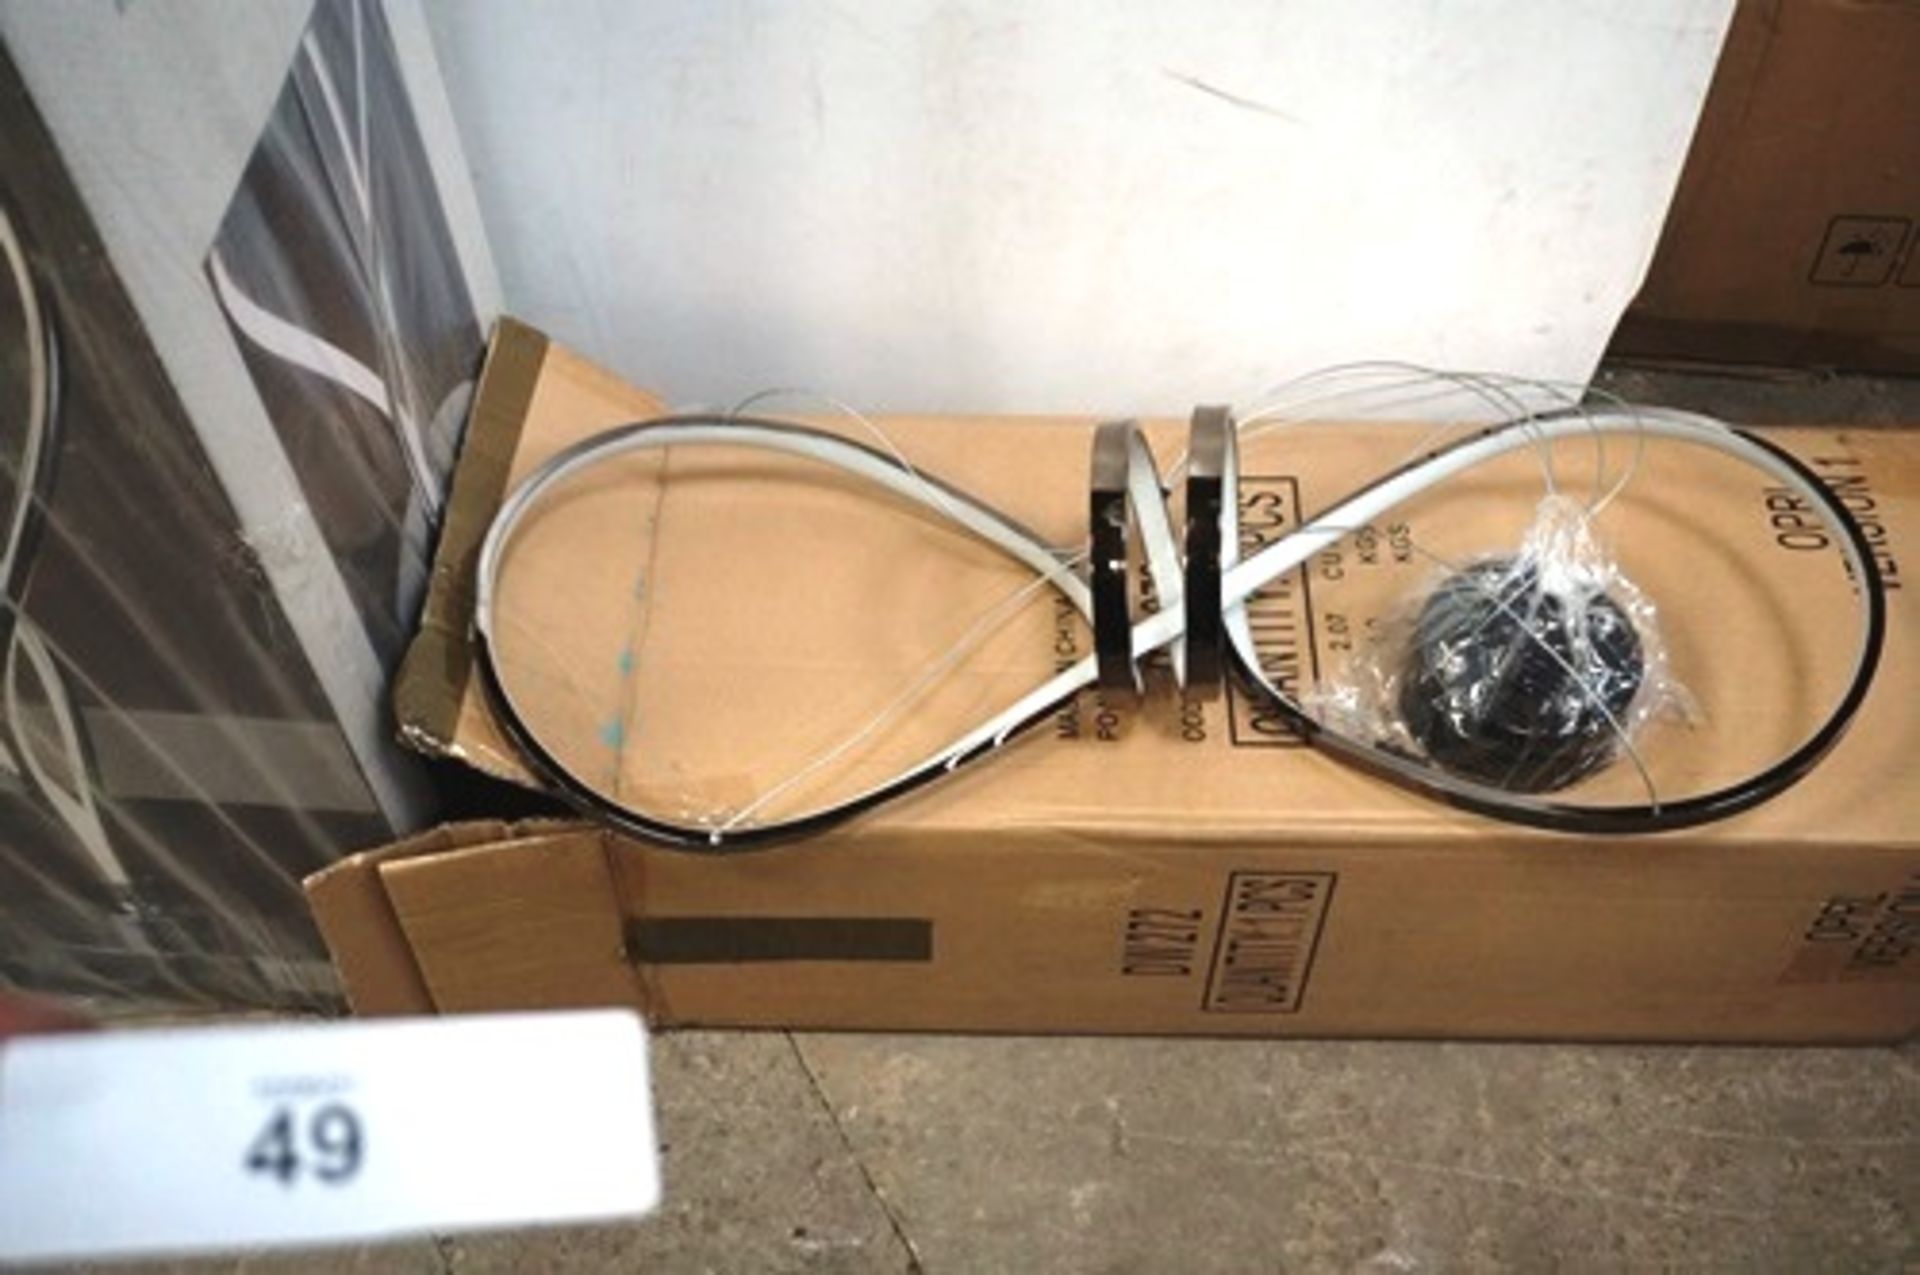 1 x chrome entwined LED floor lamp, SKU: 223505, new in box together with 1 x Dunelm twisted LED - Image 2 of 3